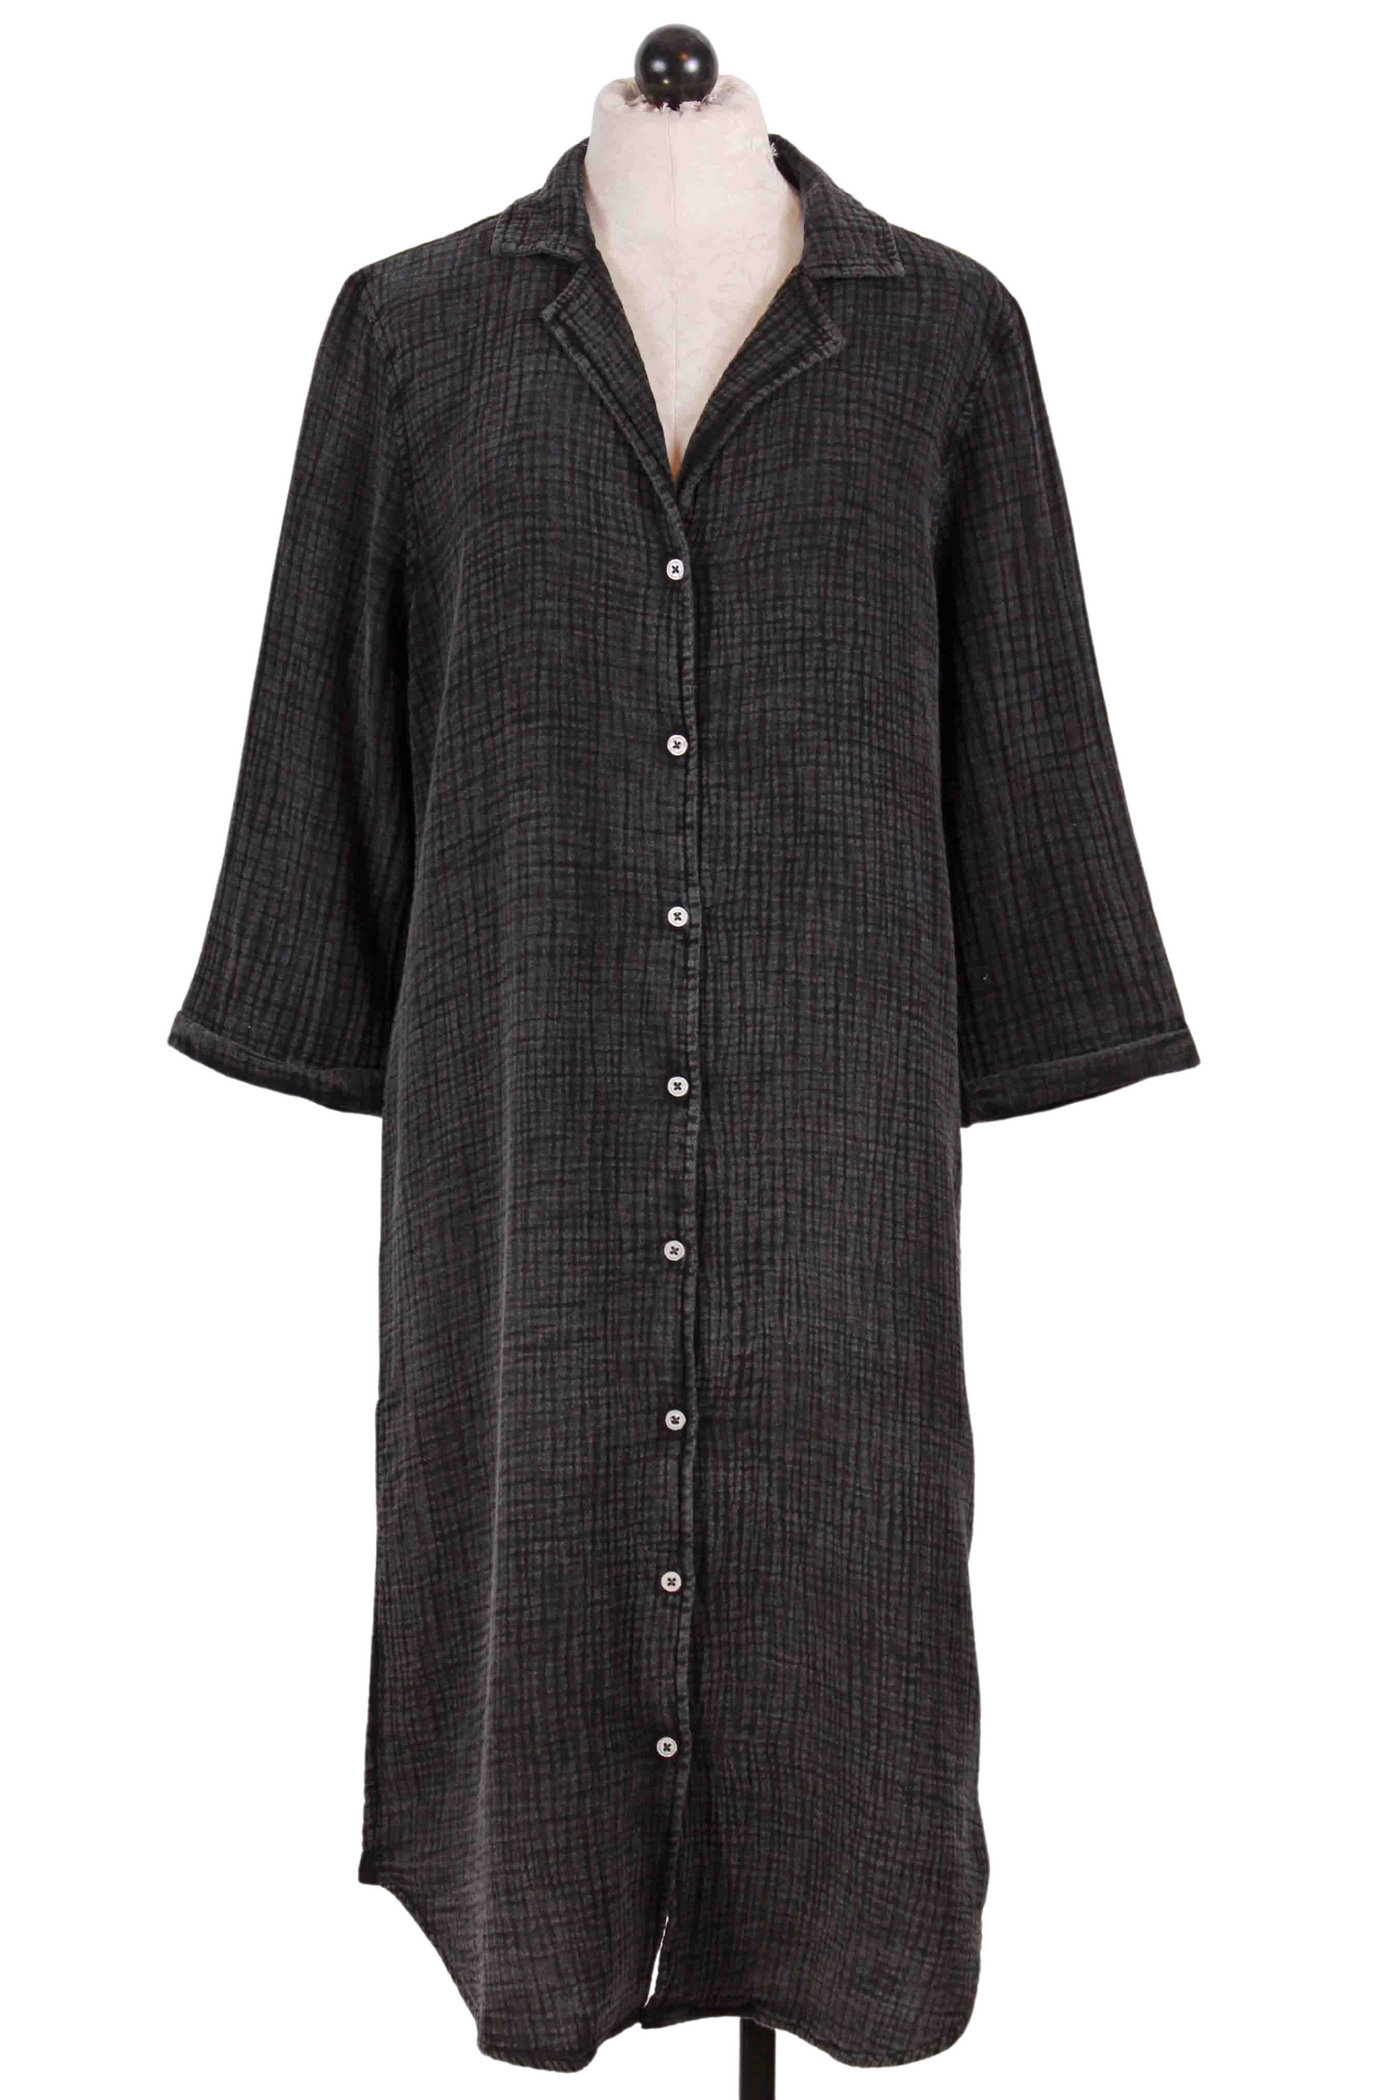 Long Black Button Down Tunic Shirt by Paper Lace